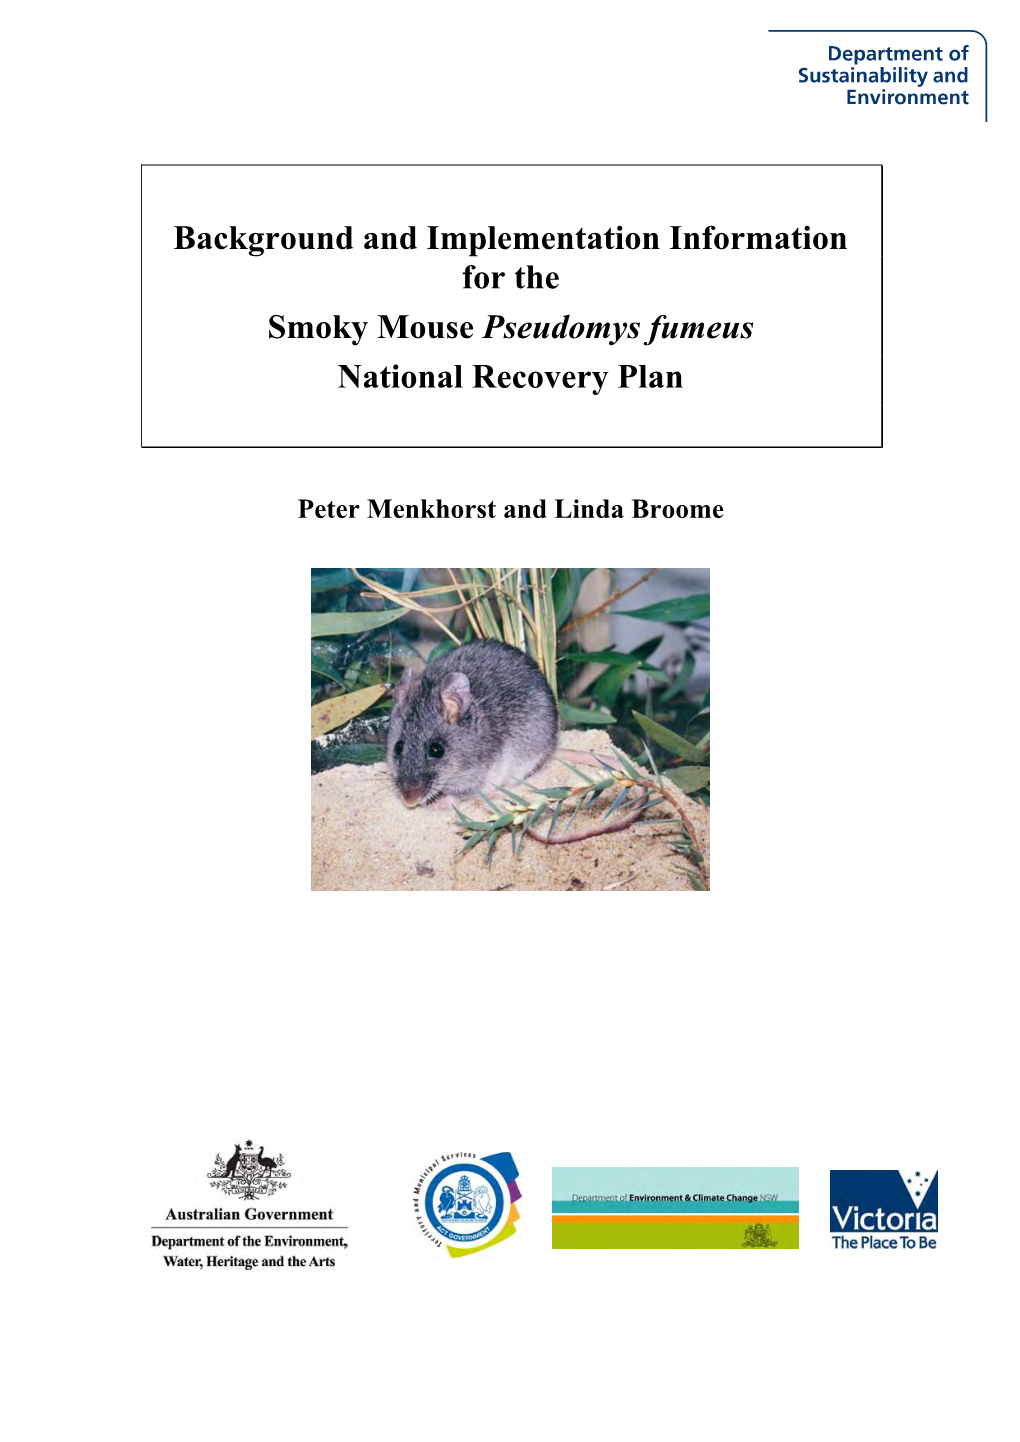 Background and Implementation Information for the Smoky Mouse Pseudomys Fumeus National Recovery Plan